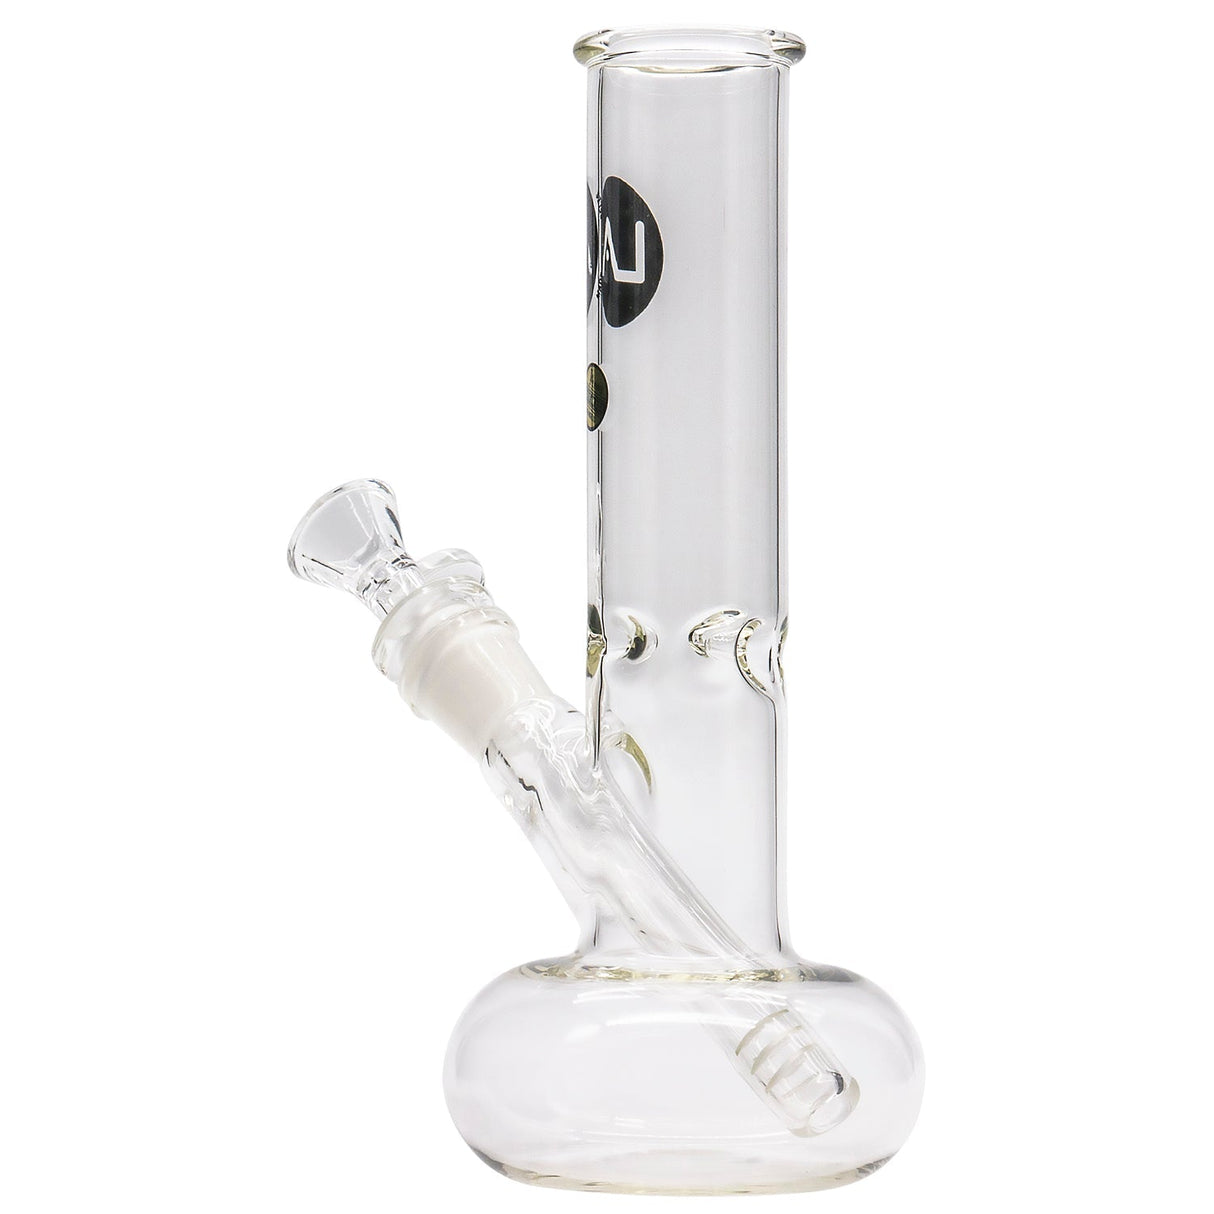 LA Pipes Donut Base Bong with Clear Borosilicate Glass, Side View on White Background